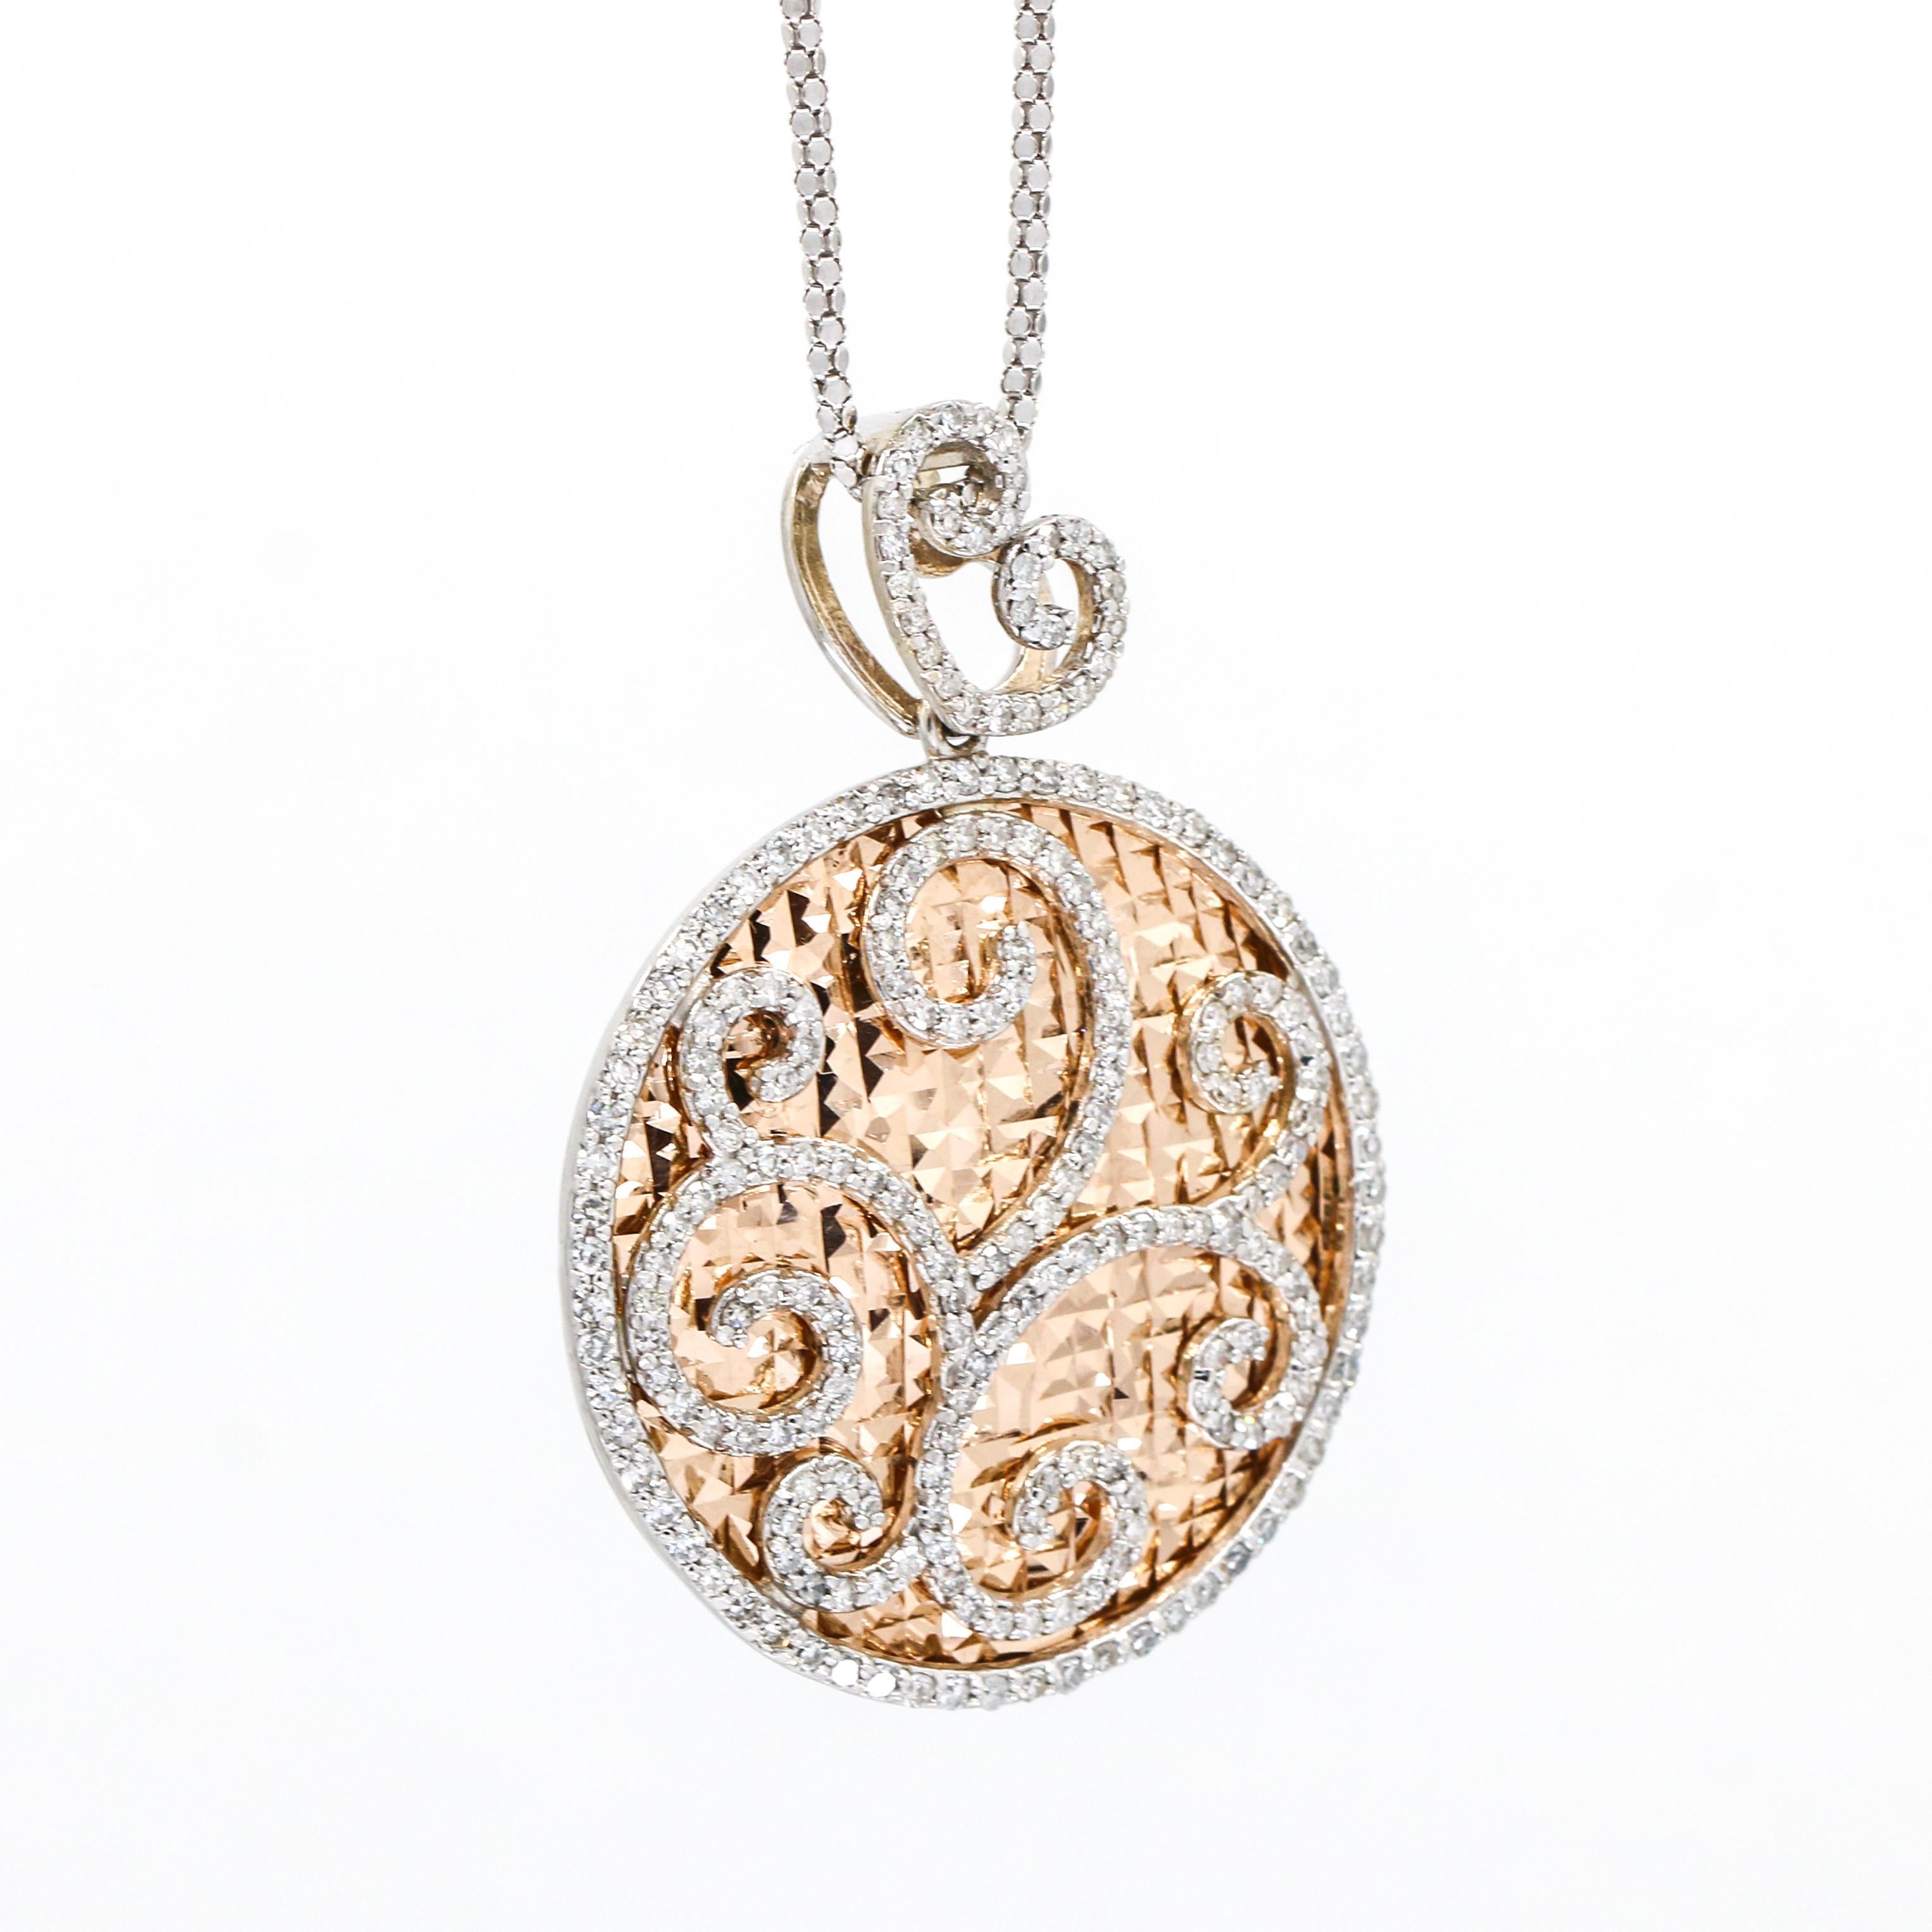 Round disk pendant with rose gold diamond cut background, white gold swirl details, and heart shaped bale pave set with diamonds. The pendant comes with a 14-karat white gold chain. 

Length, 16.5 inches
Diameter, 33mm
Depth, 7mm
Weight, 18.2